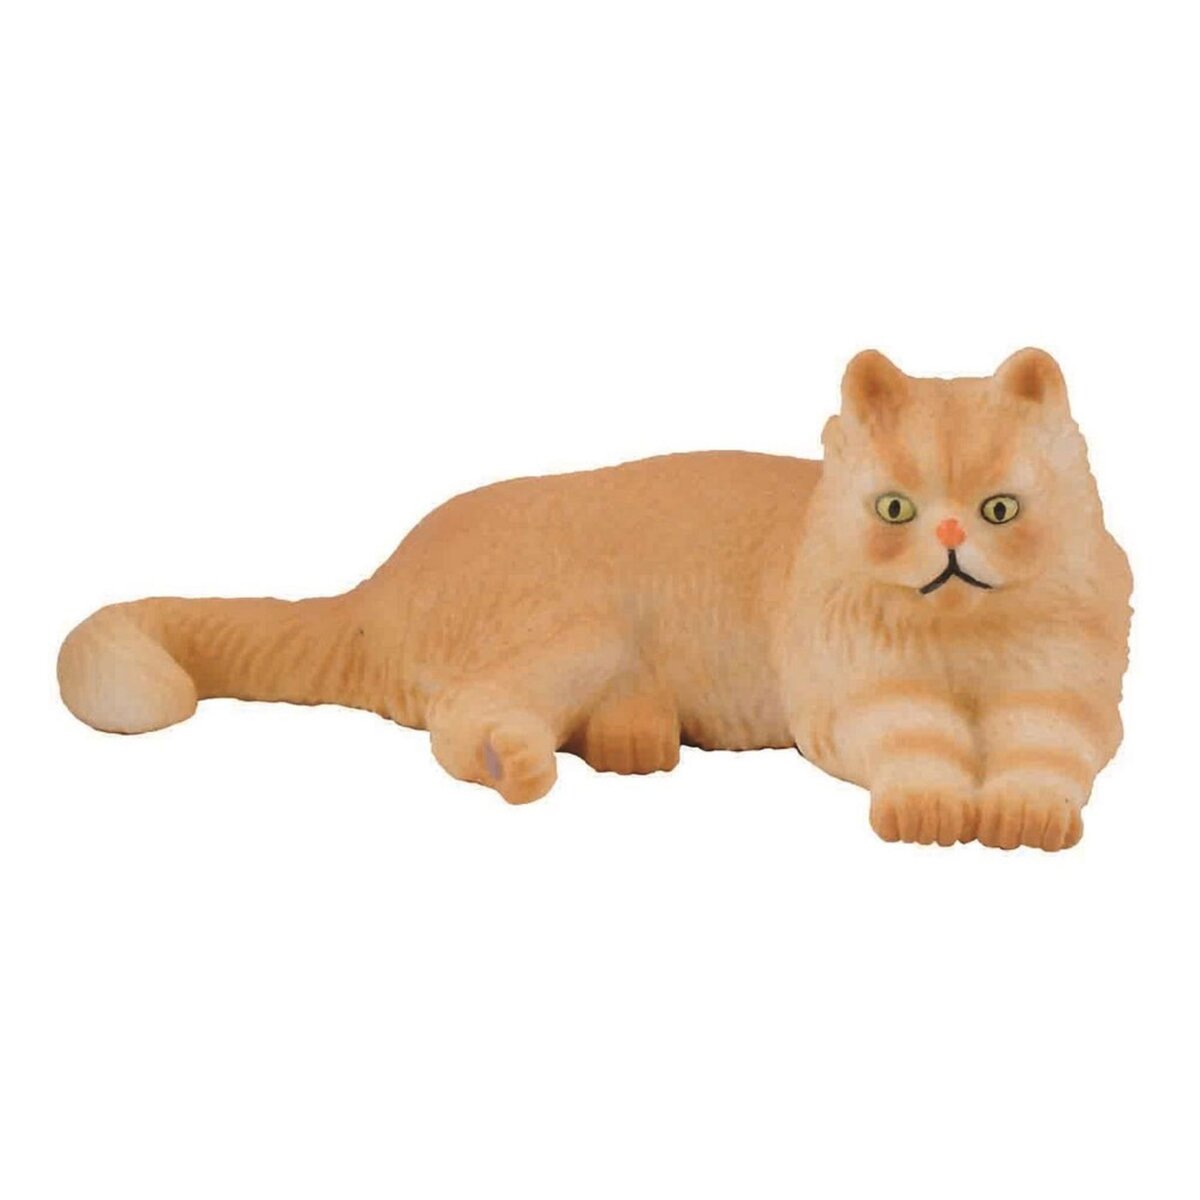 Figurines Collecta Figurine Chat : Persan couché pas cher 